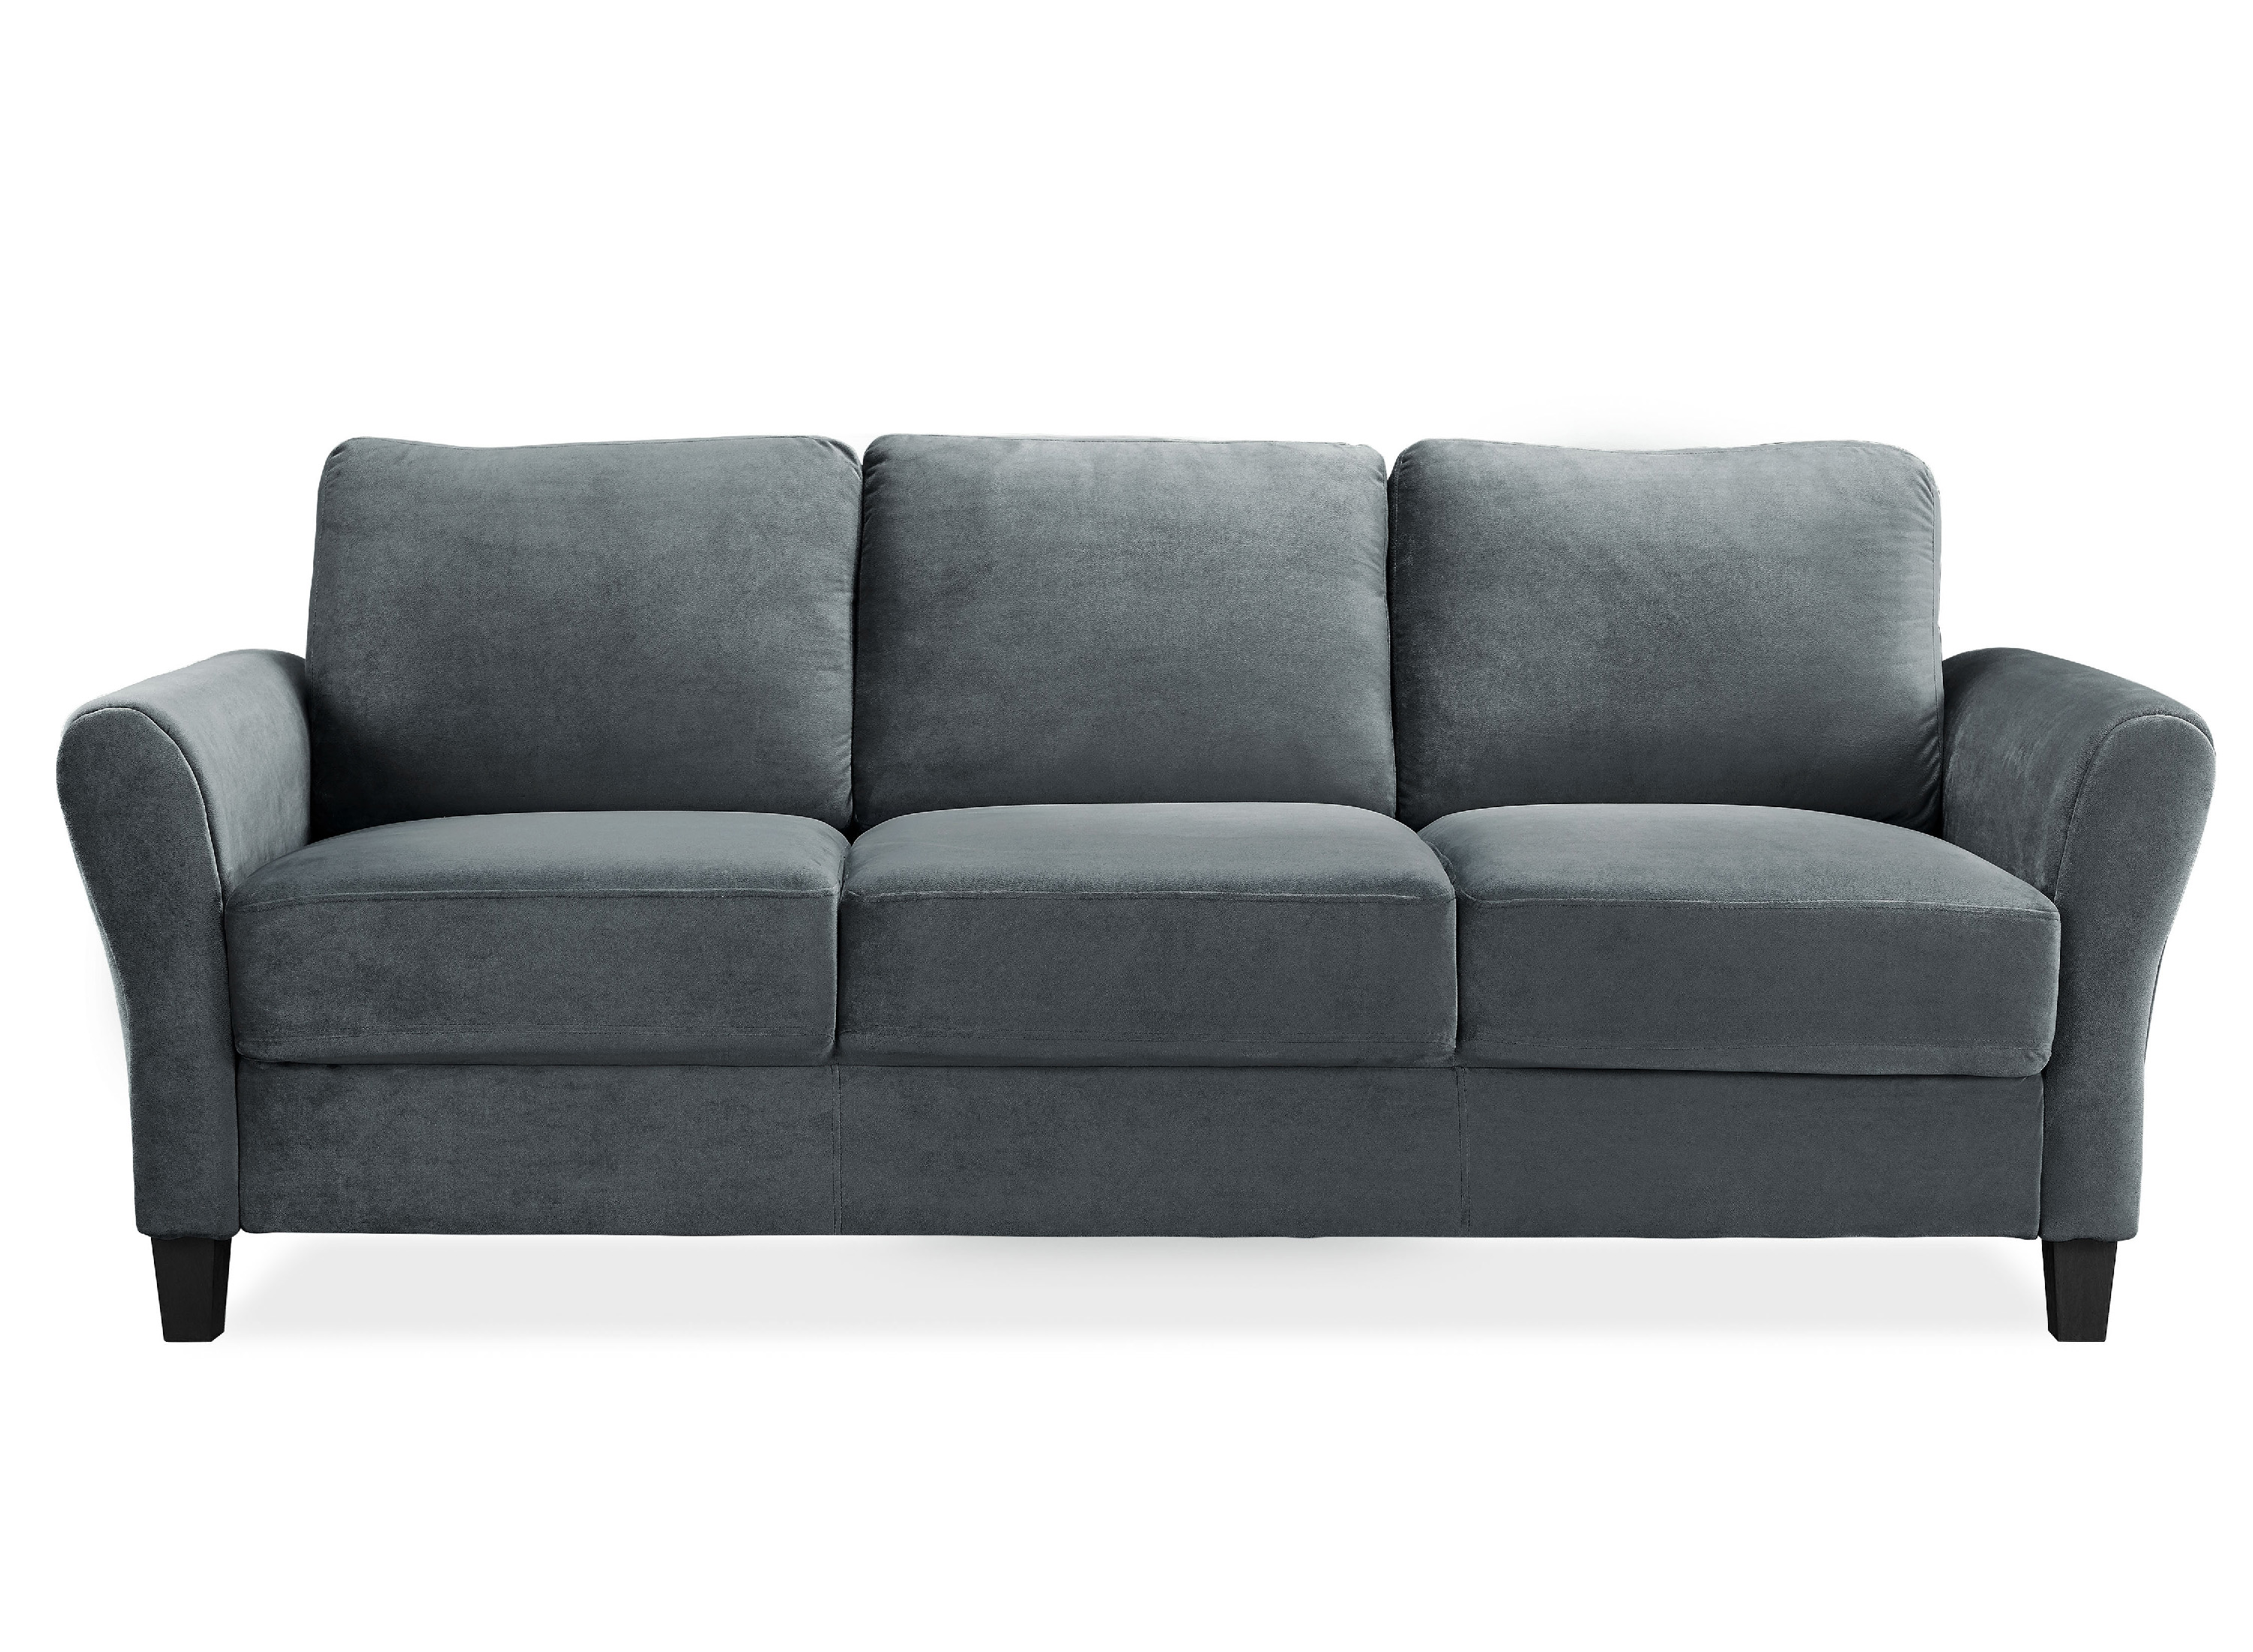 Lifestyle Solutions Alexa Sofa with Curved Arms, Gray Fabric - image 3 of 6